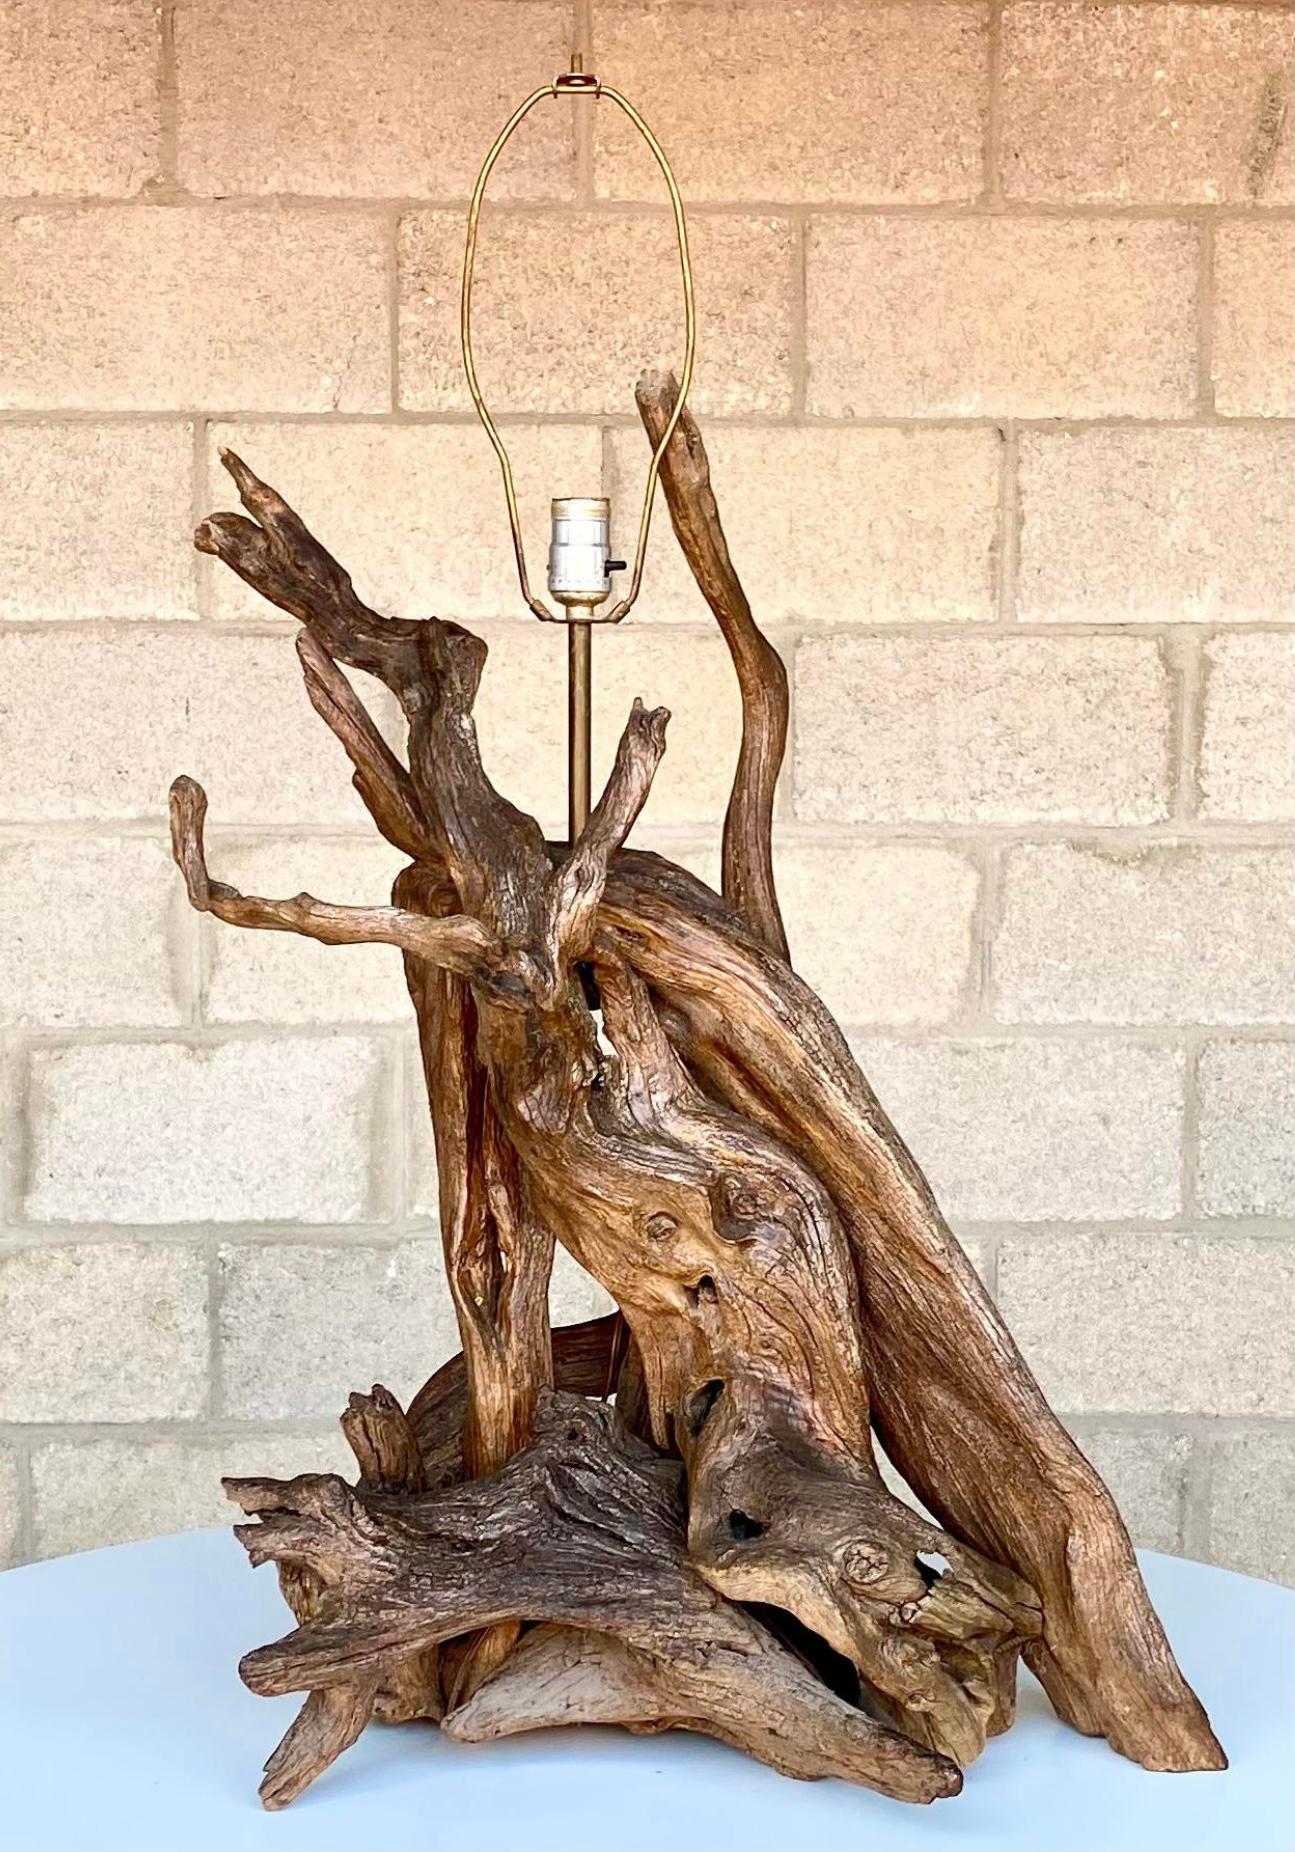 Fantastic vintage driftwood lamp. Beautiful organic modern style with heavy rustic branches. A tall composition of gnarly wood. Acquired from a Palm Beach estate.